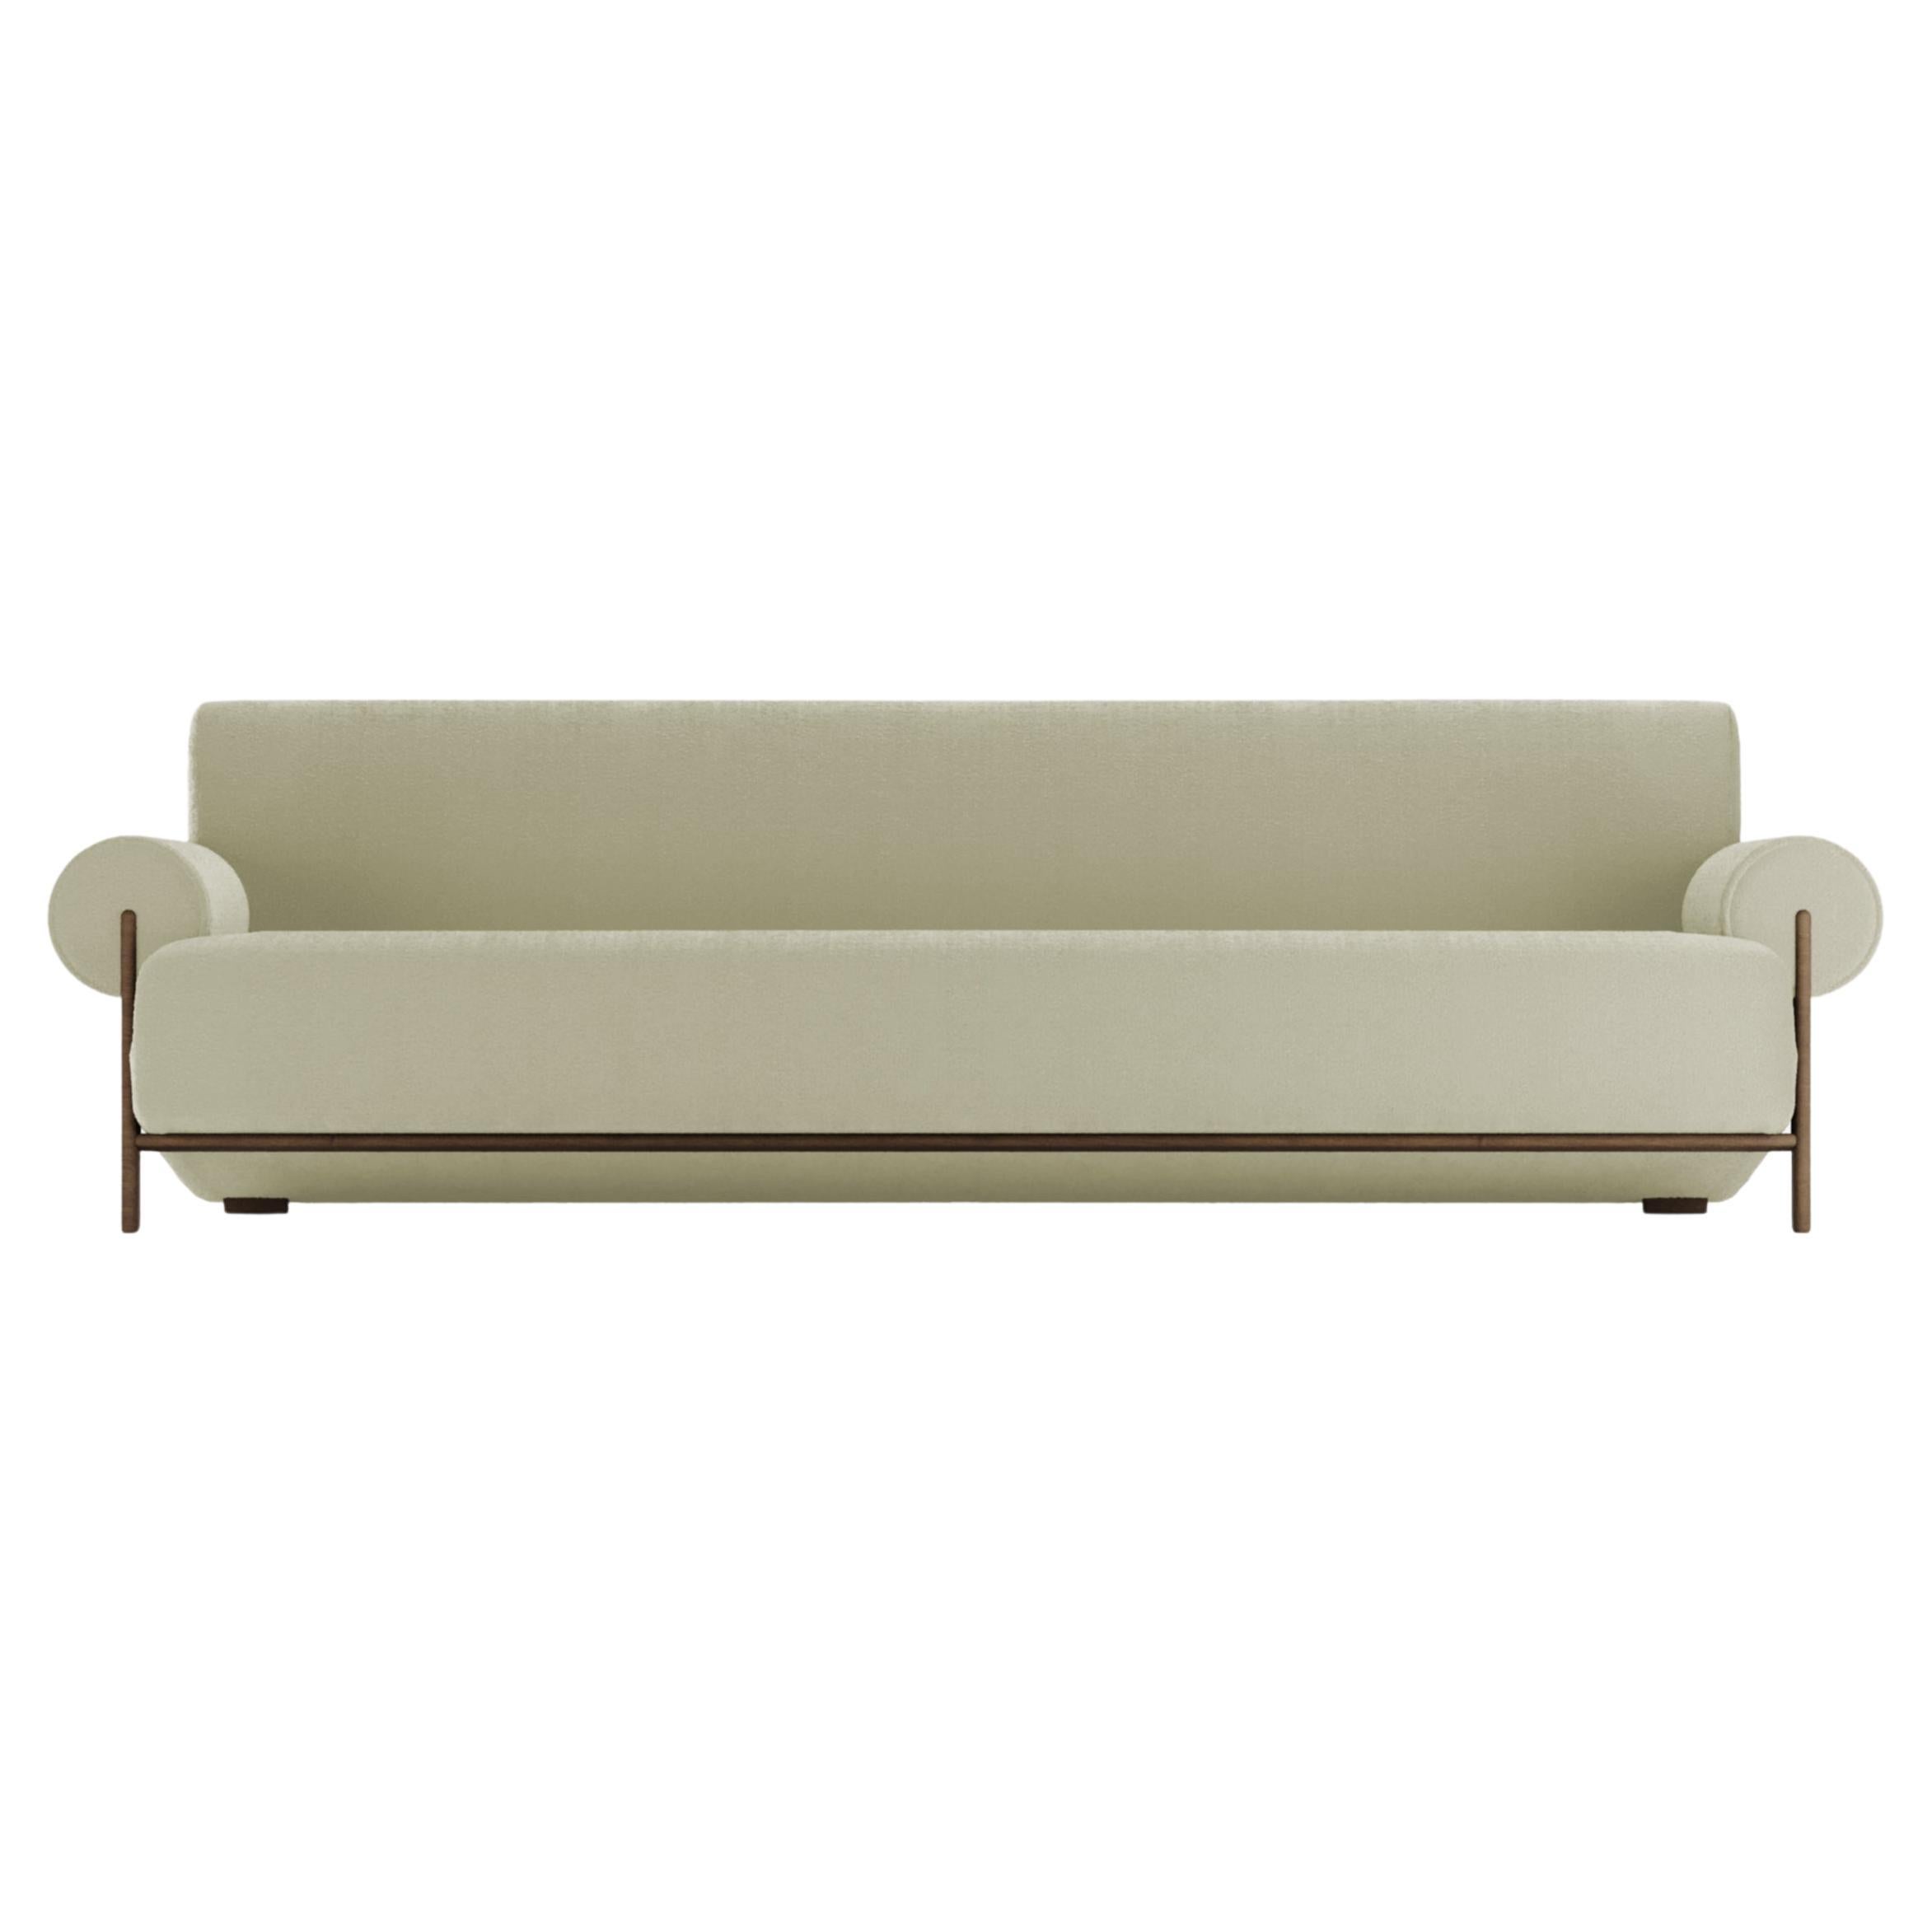 Contemporary Modern Paloma Sofa in Bouclé Beige by Collector